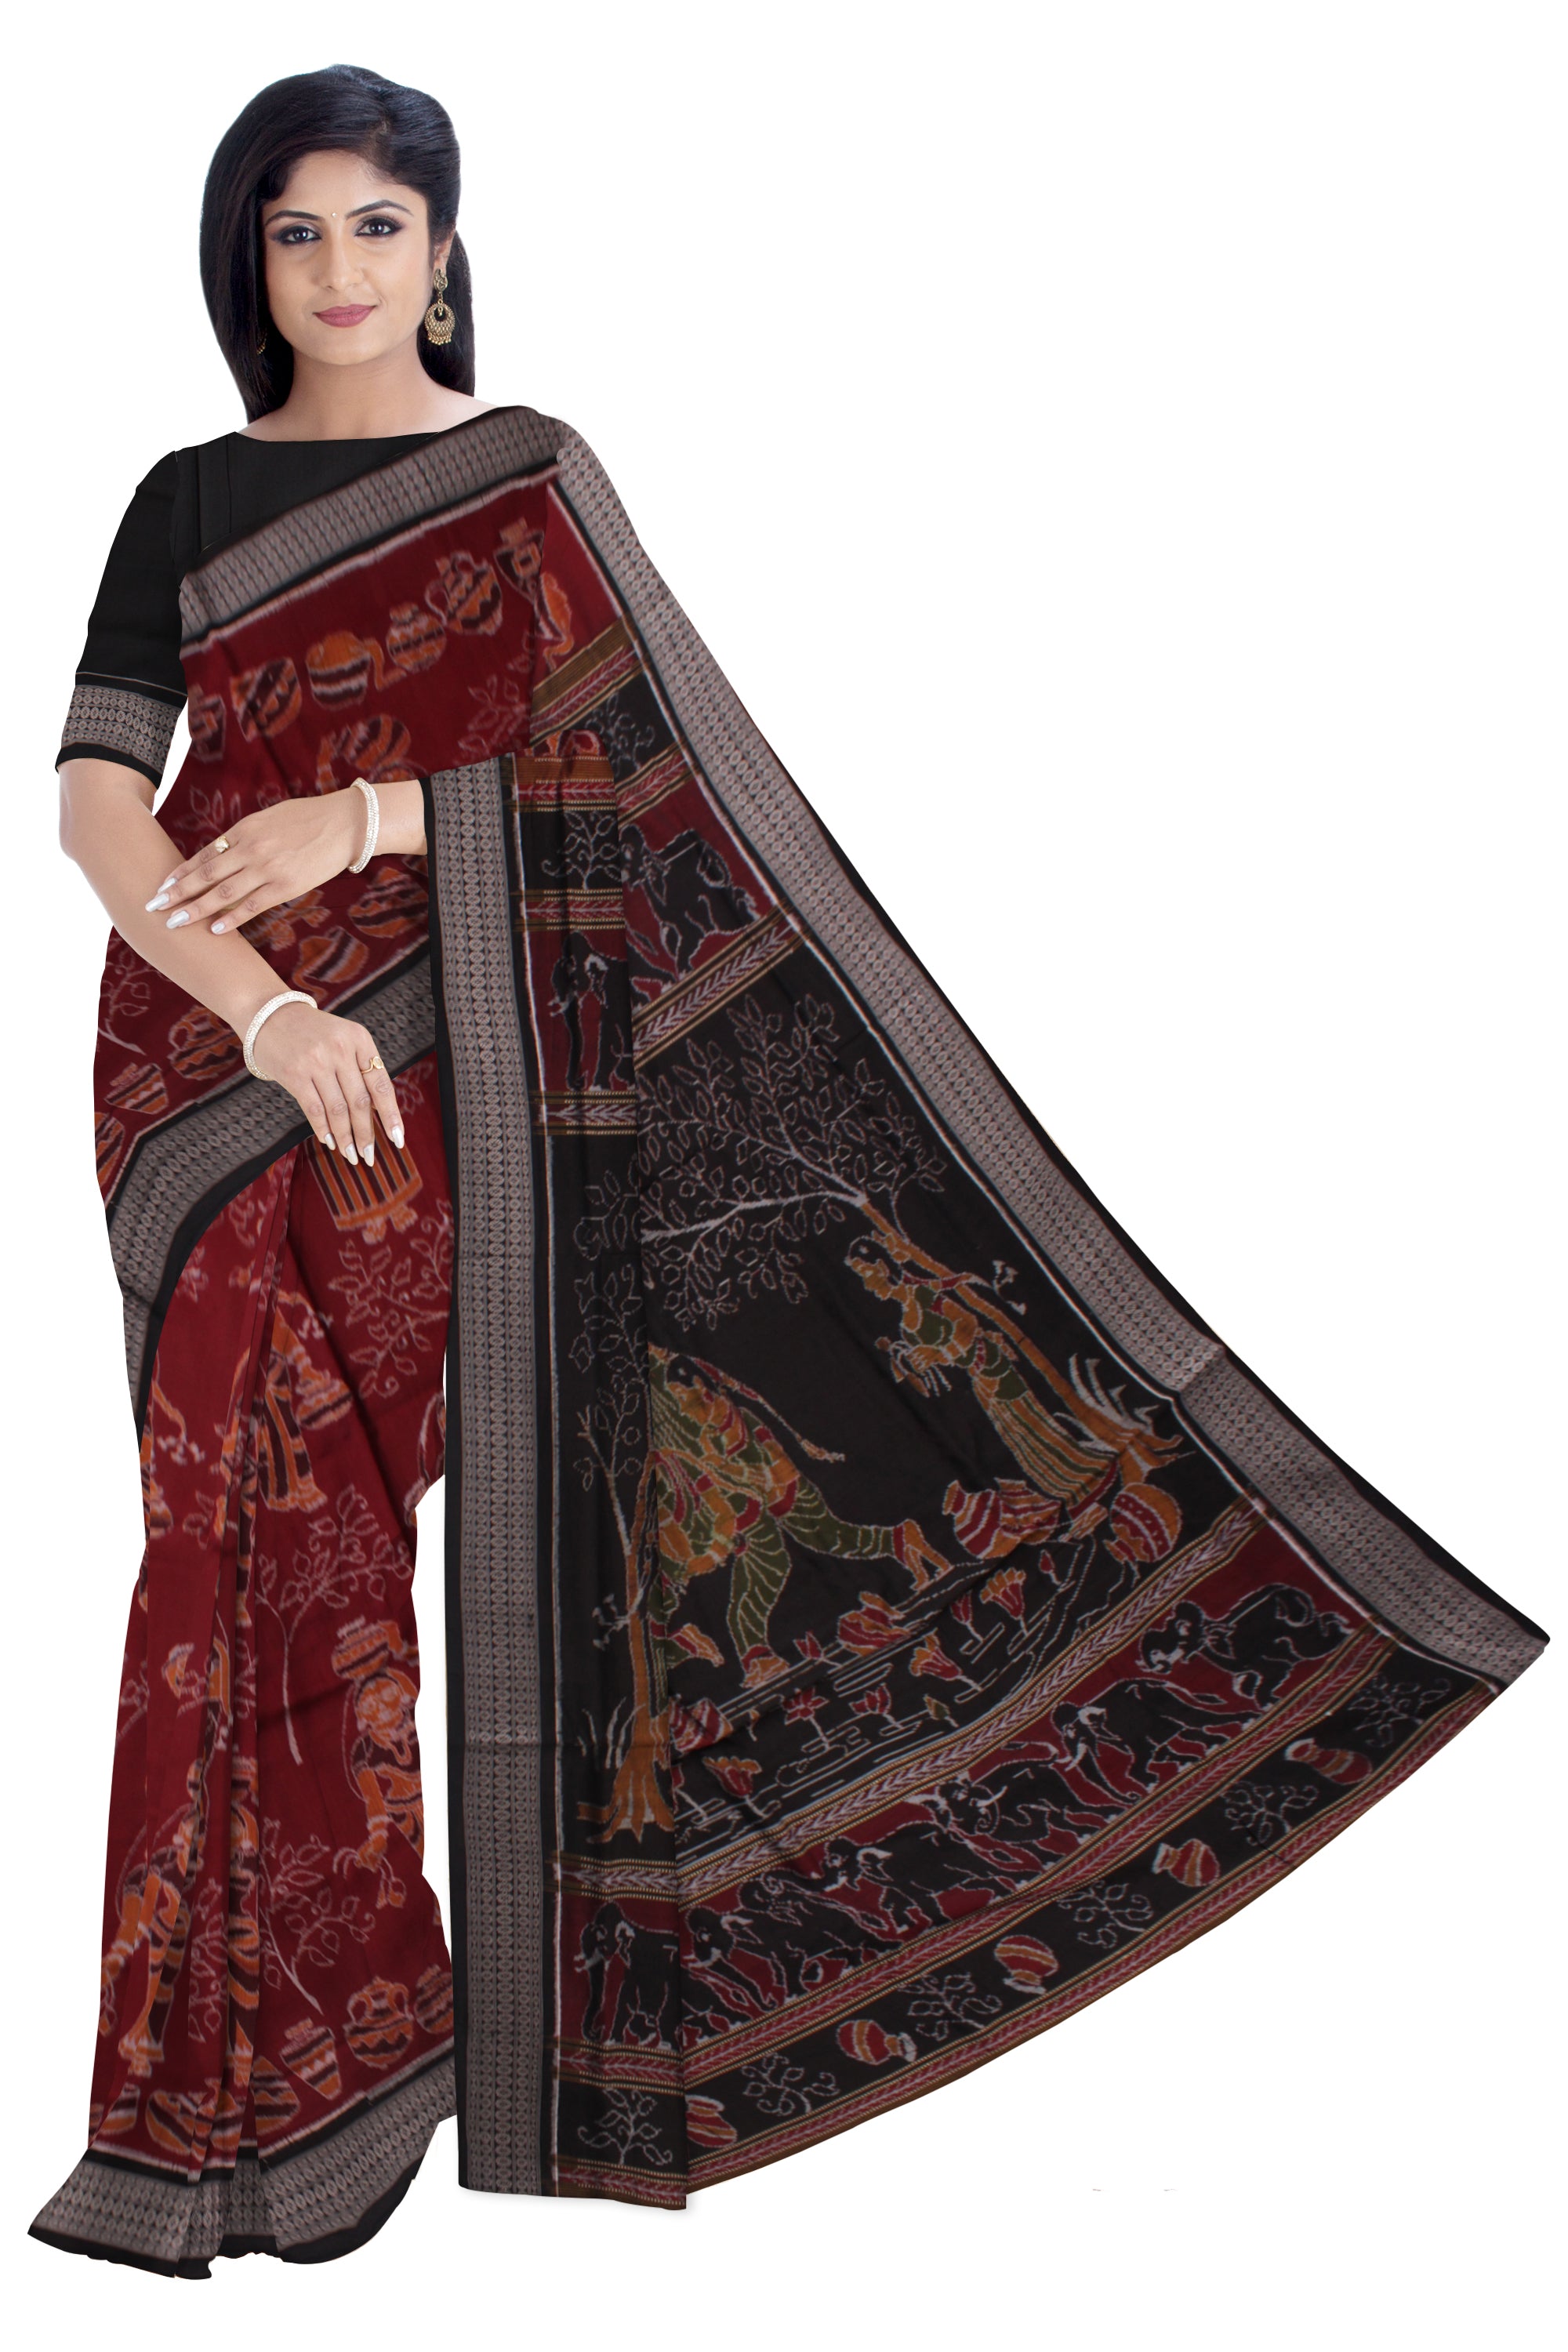 TRIBAL VILLAGE PATTERN PURE COTTON SAREE IS COFFEE AND BLACK COLOR BASE,WITH MATCHING BLOUSE PIECE. - Koshali Arts & Crafts Enterprise